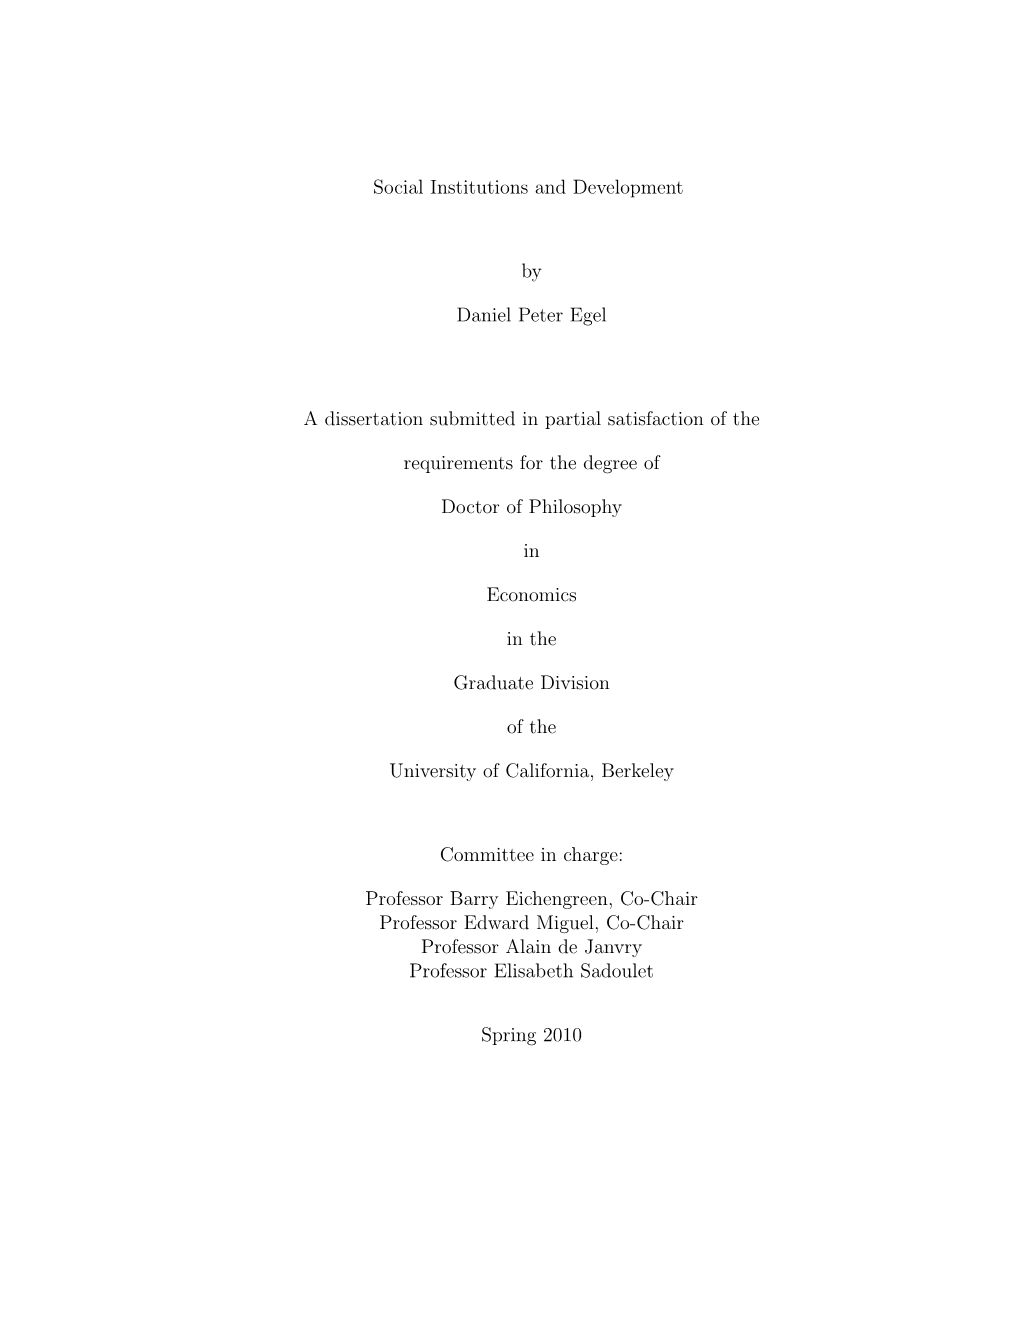 Social Institutions and Development by Daniel Peter Egel a Dissertation